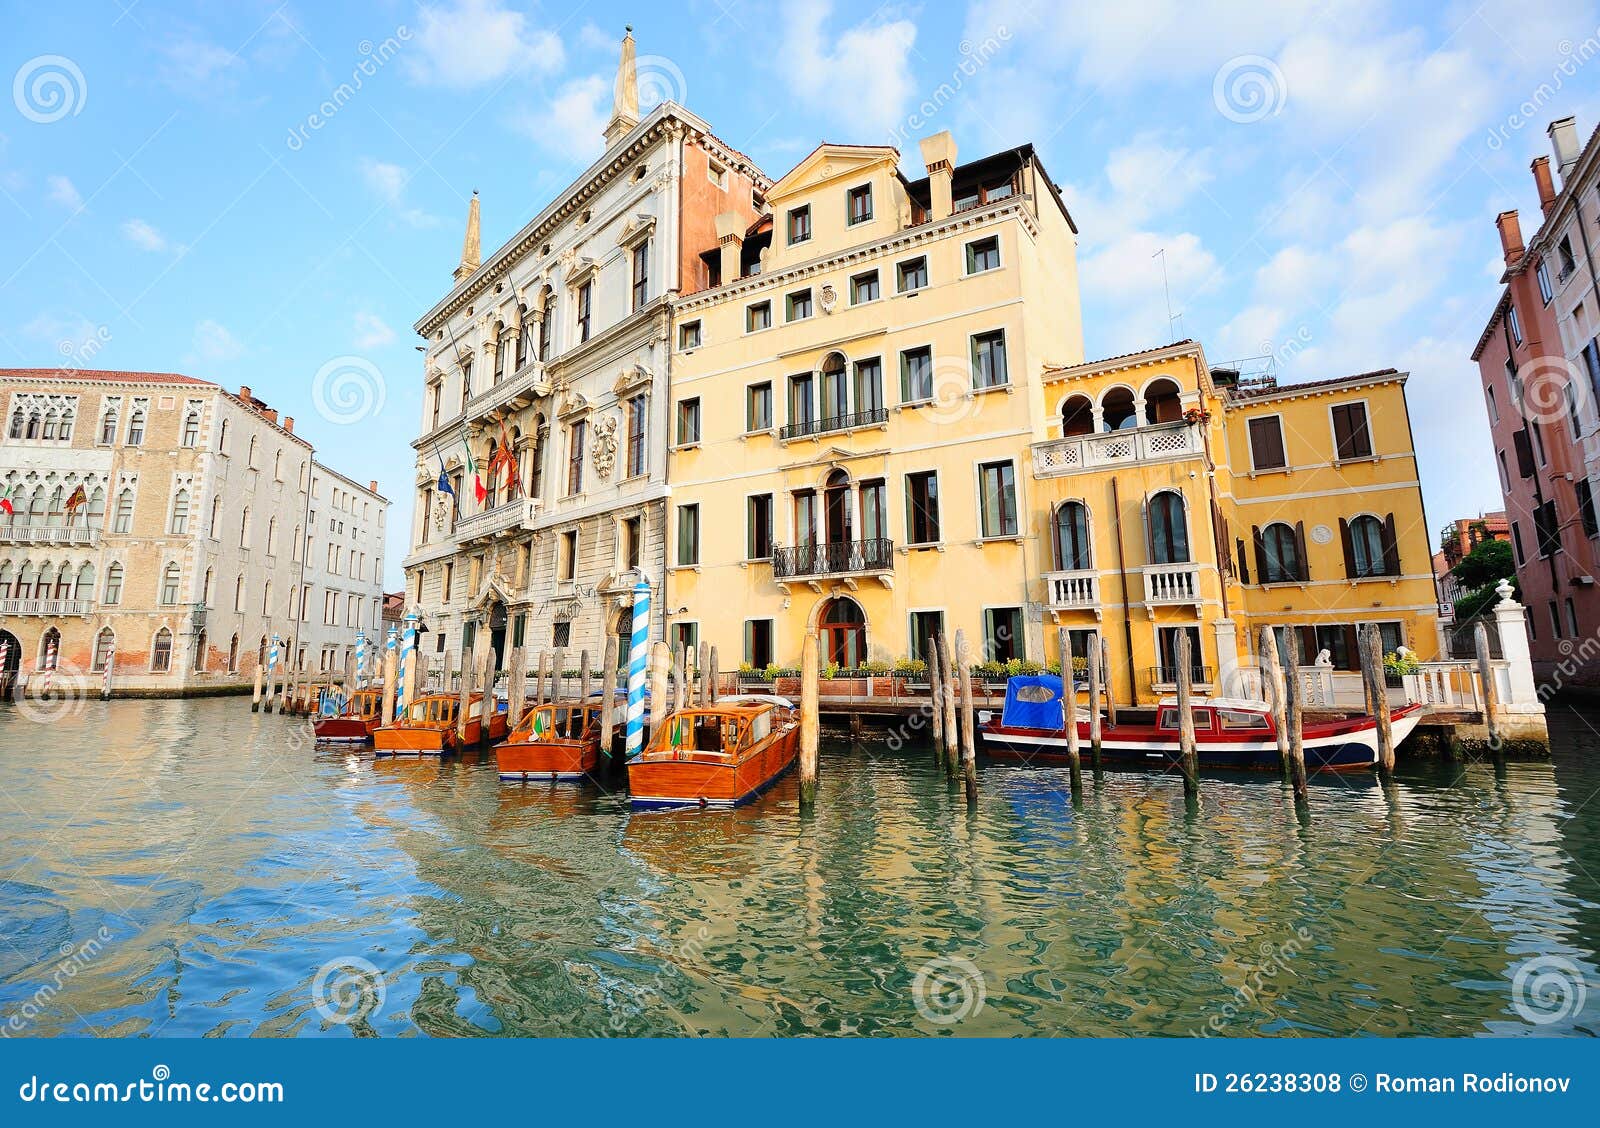 view to palazzos on grand canal in venice